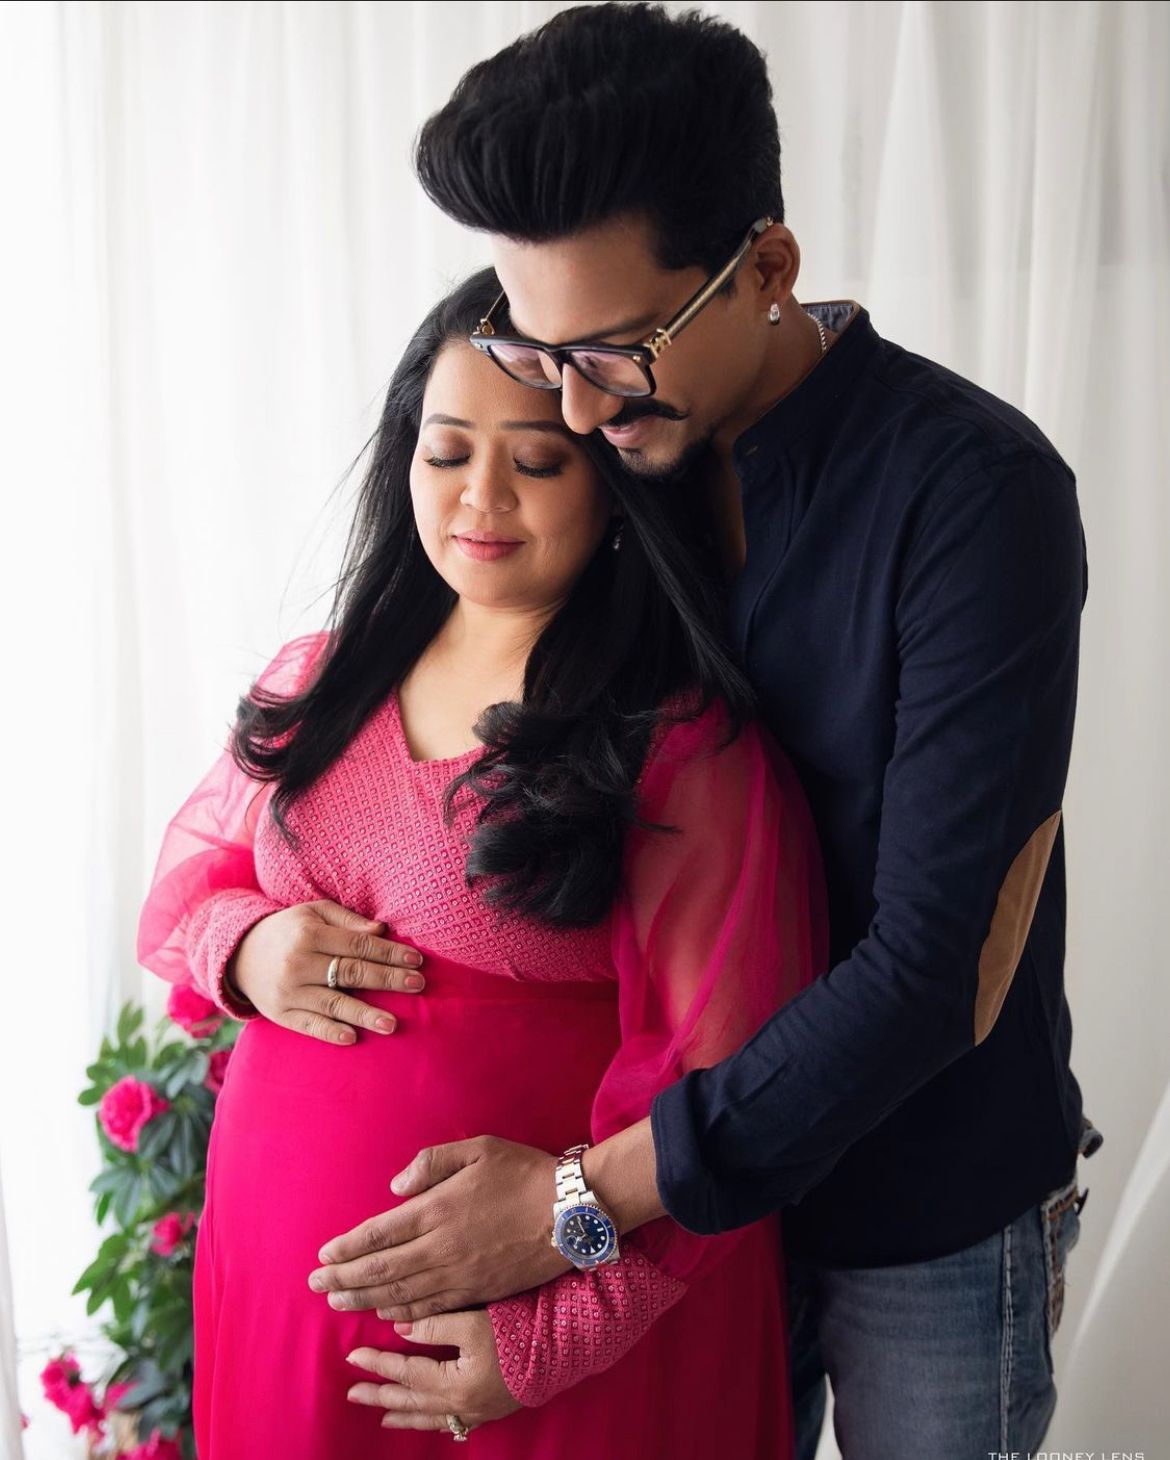 Talking About Her Wedding, Bharti Says That She Will Have An Elaborate  Wedding Ceremony.